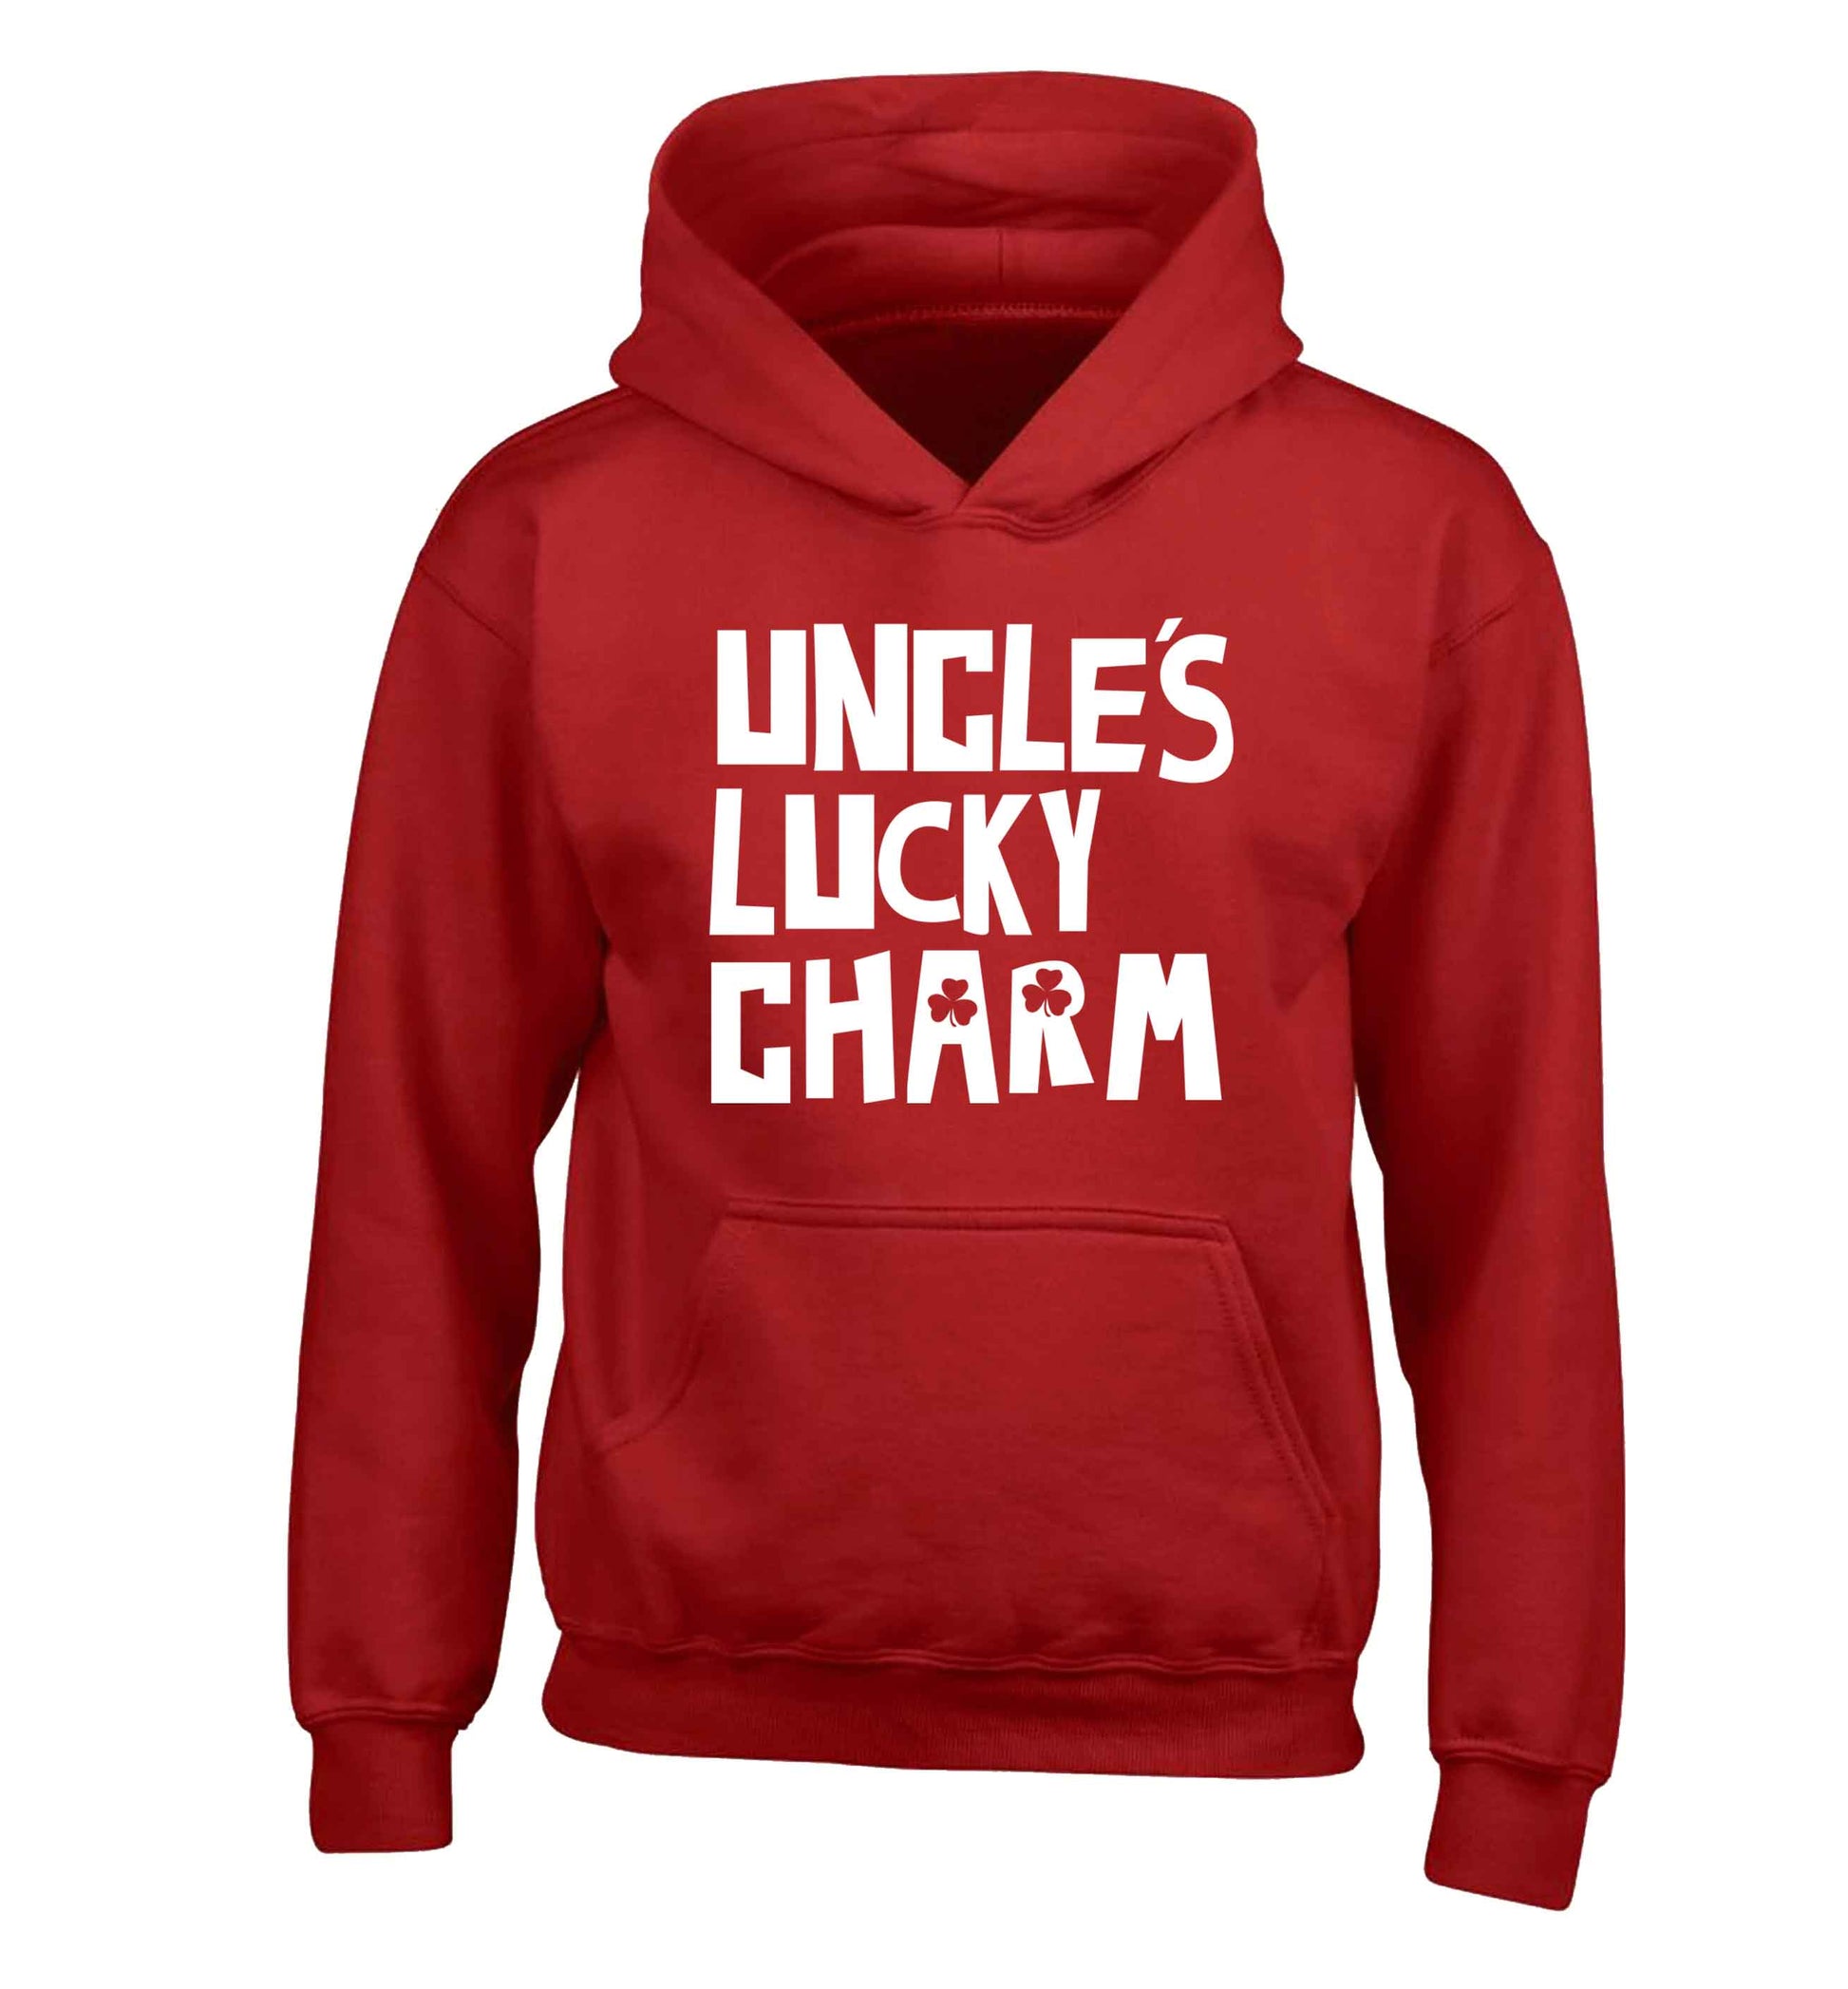 Uncles lucky charm children's red hoodie 12-13 Years